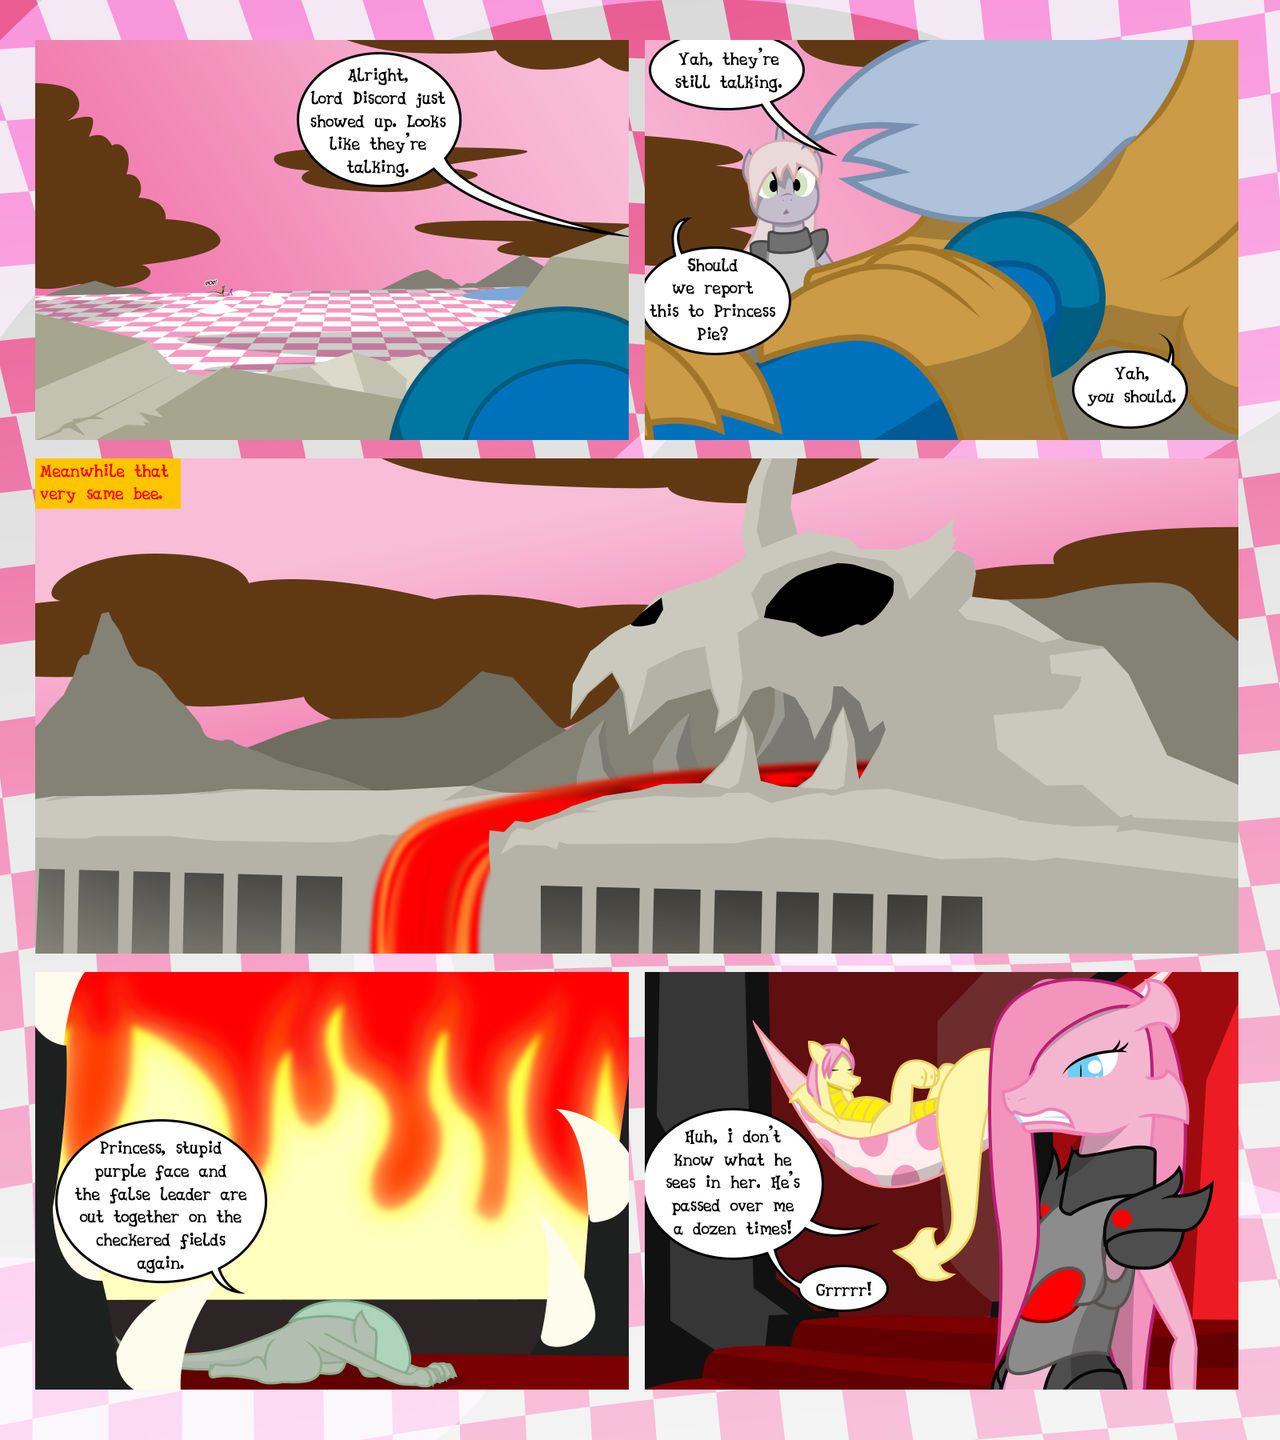 [GatesMcCloud] Cutie Mark Crusaders 10k: Chapter 3 - The Lost (My Little Pony: Friendship is Magic) [English] [Ongoing] 77